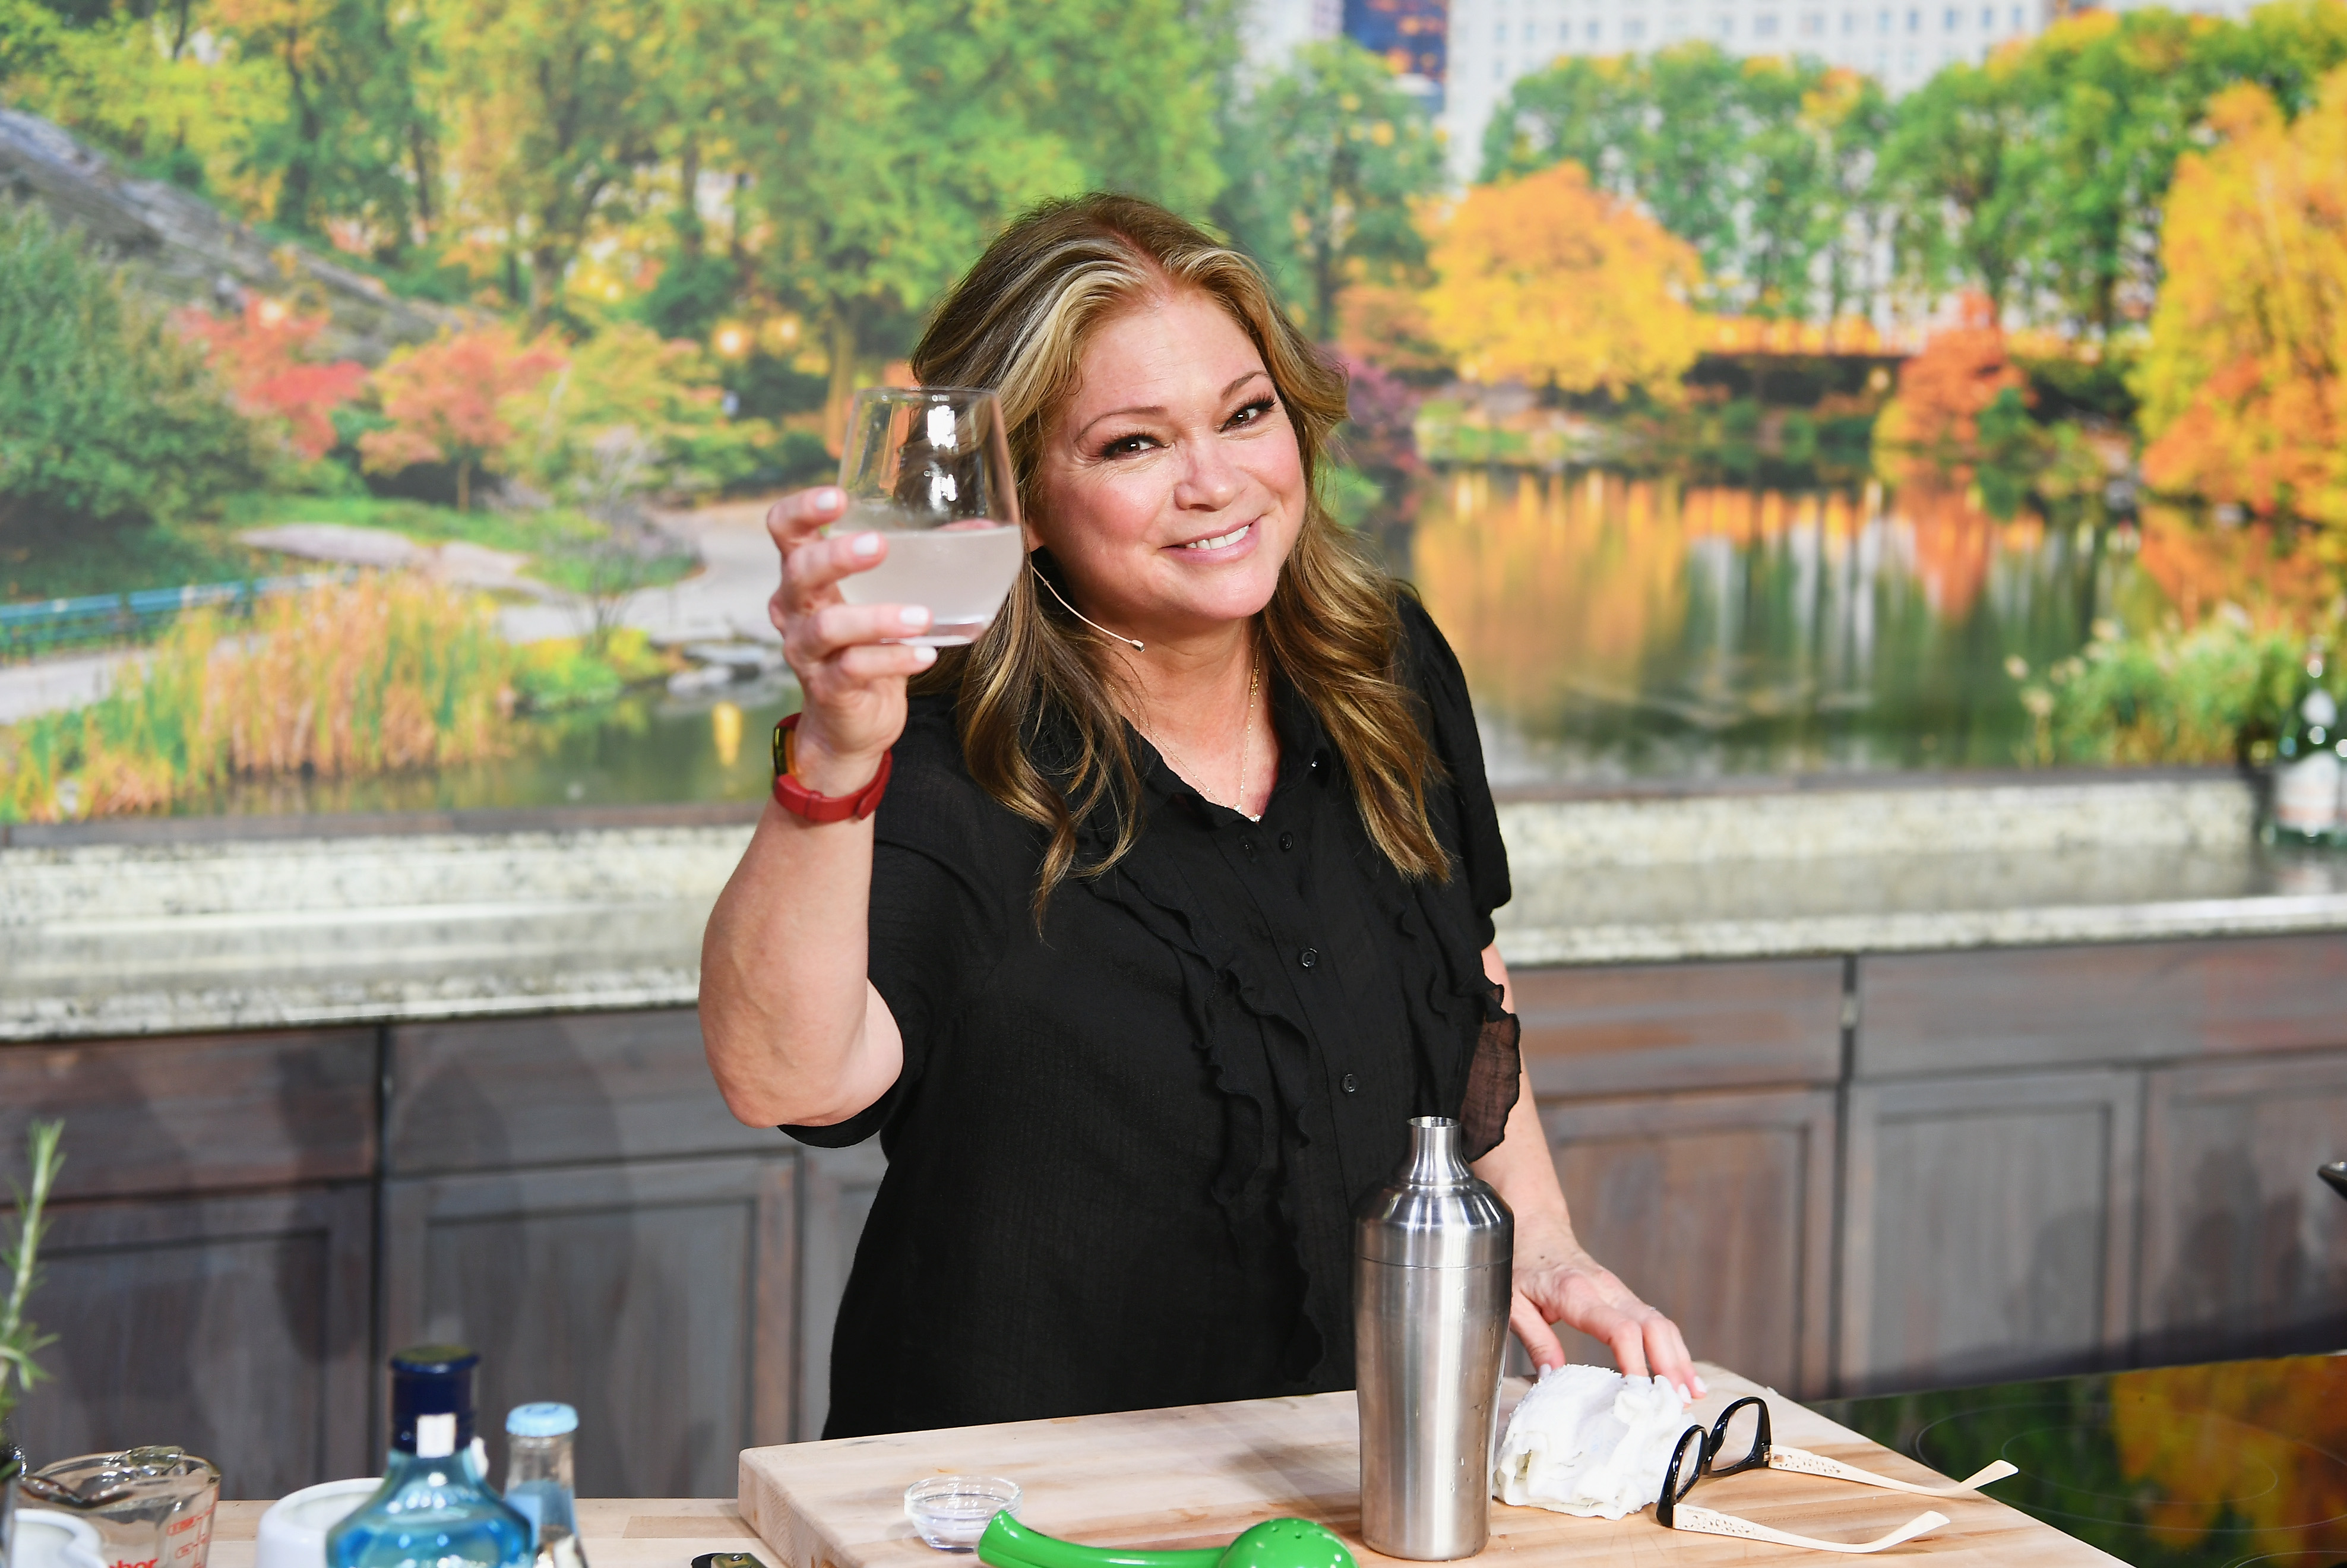 Cooking personality Valerie Bertinelli smiles as she lifts a glass during a 2018 Food Network event.